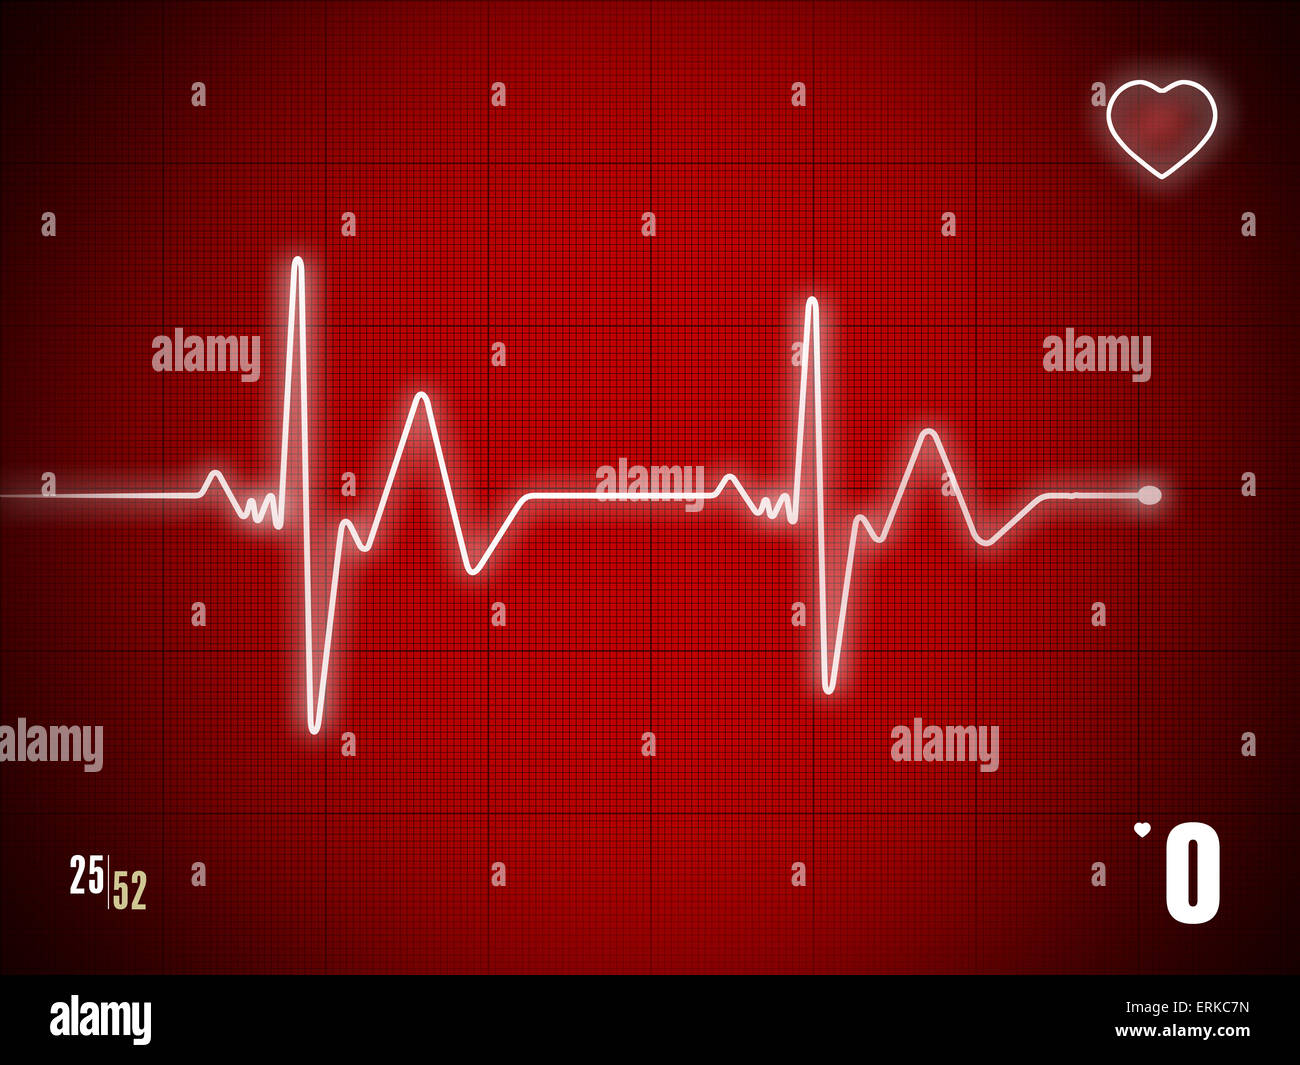 EKG trace showing death moment. Stock Photo